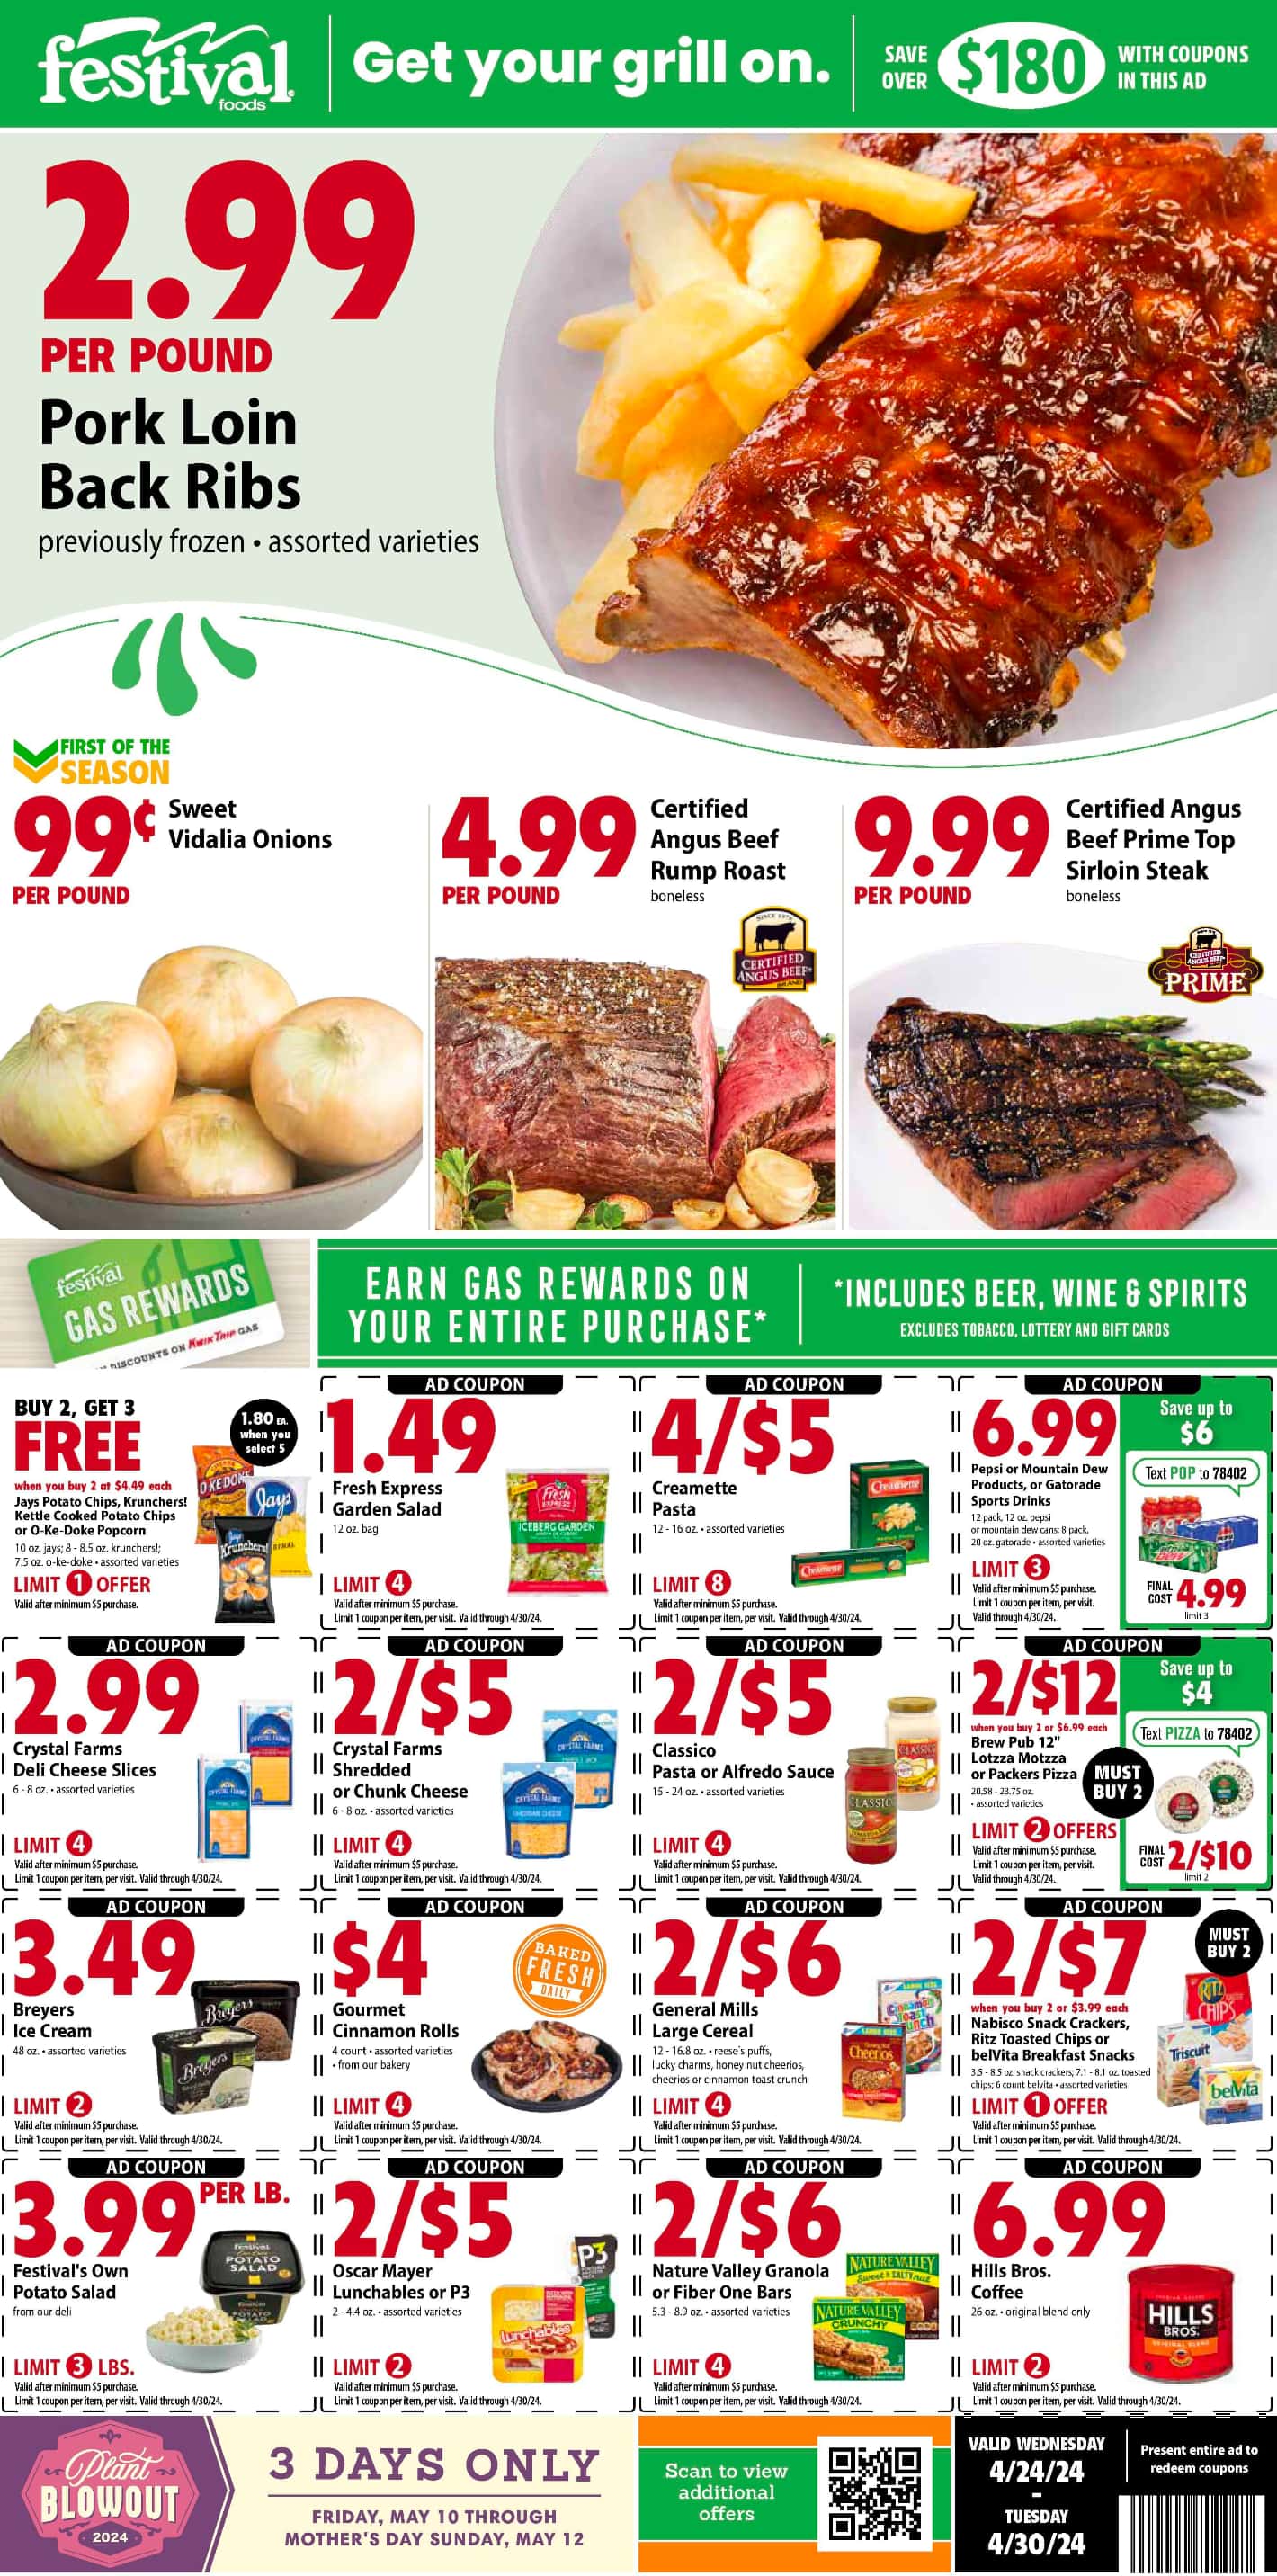 FestivalFoods_weekly_ad_042424_01